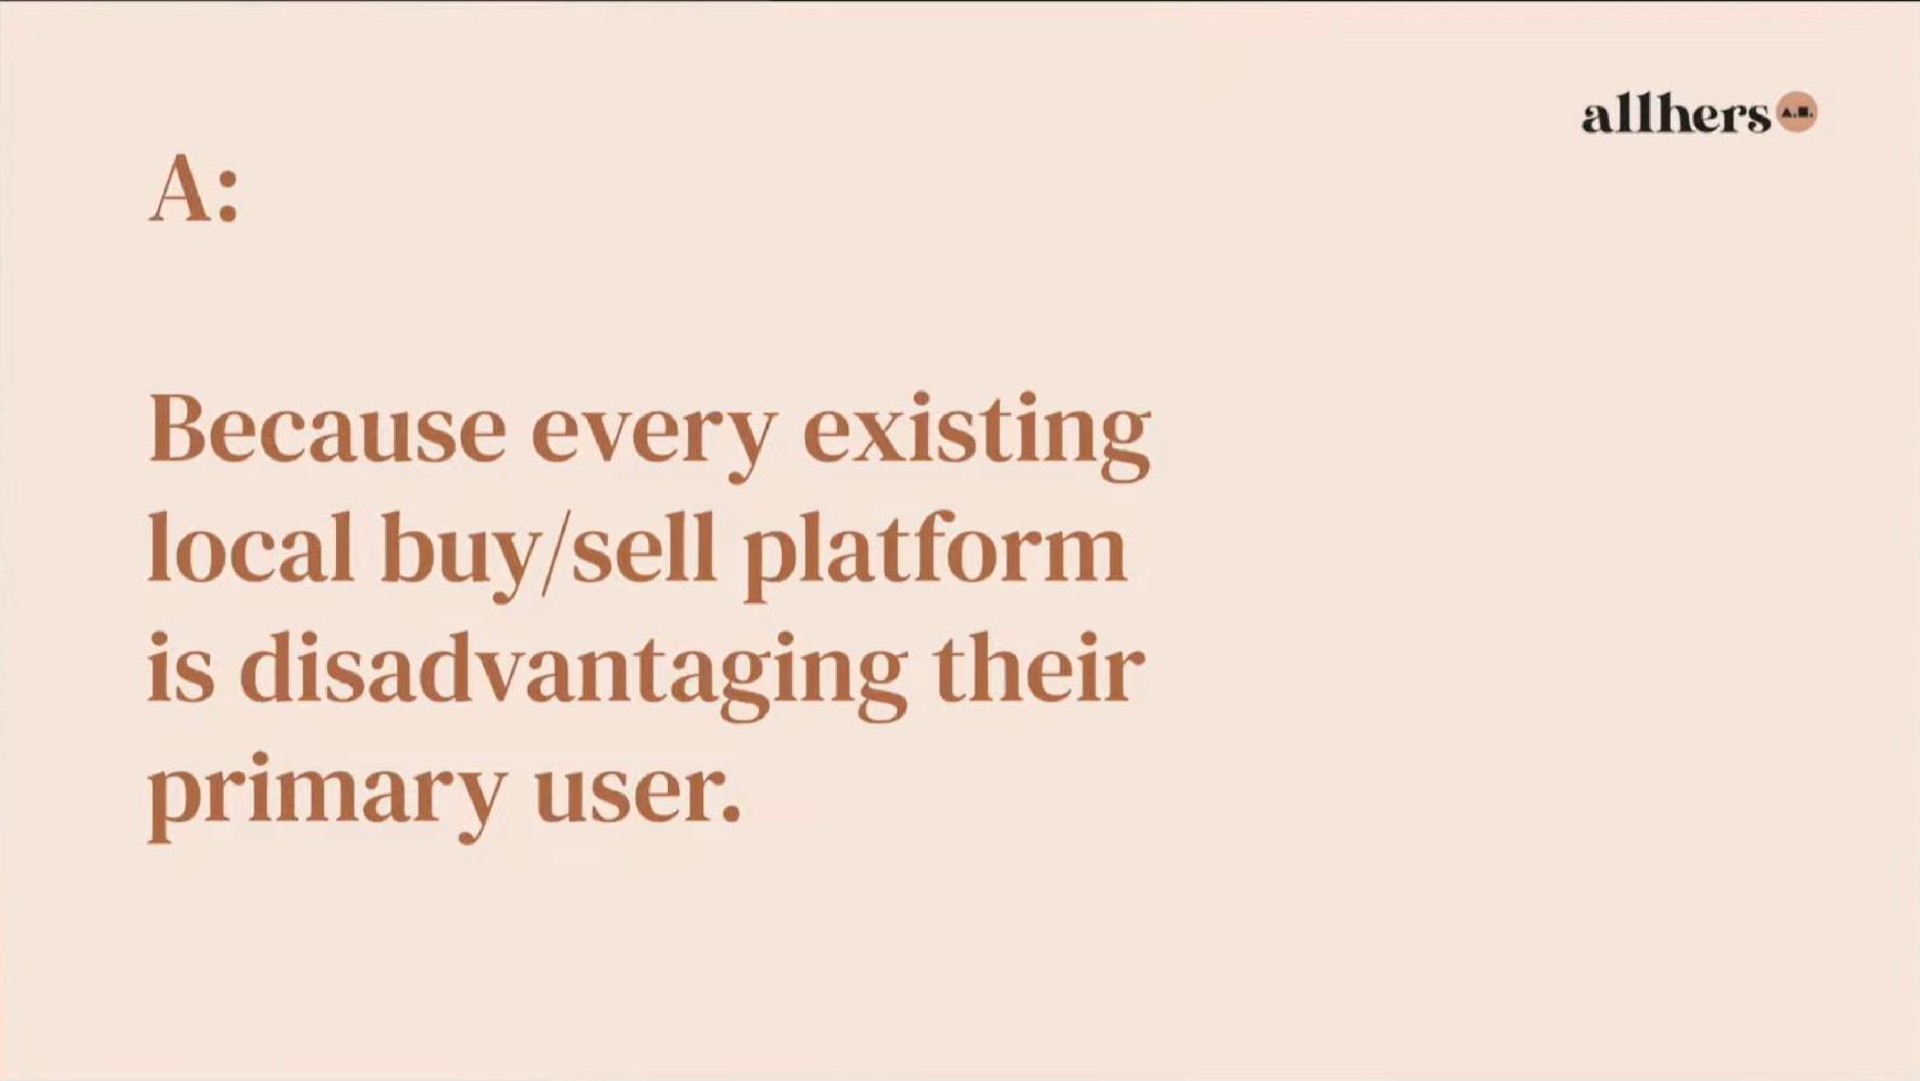 a because every existing local buy sell platform is disadvantaging their primary user | Allhers